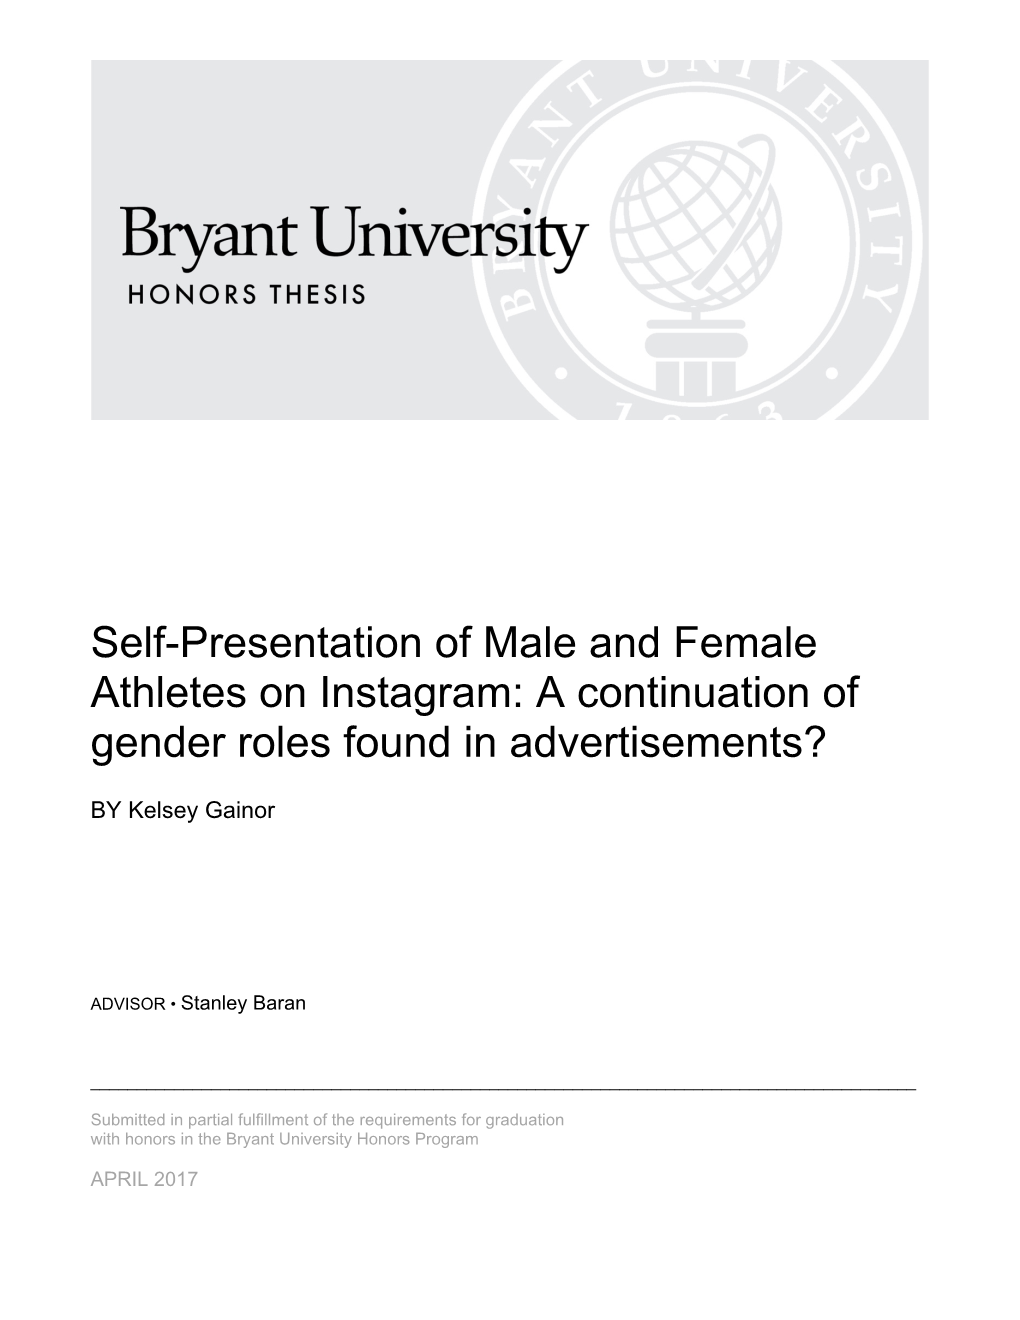 Self-Presentation of Male and Female Athletes on Instagram: a Continuation of Gender Roles Found in Advertisements?